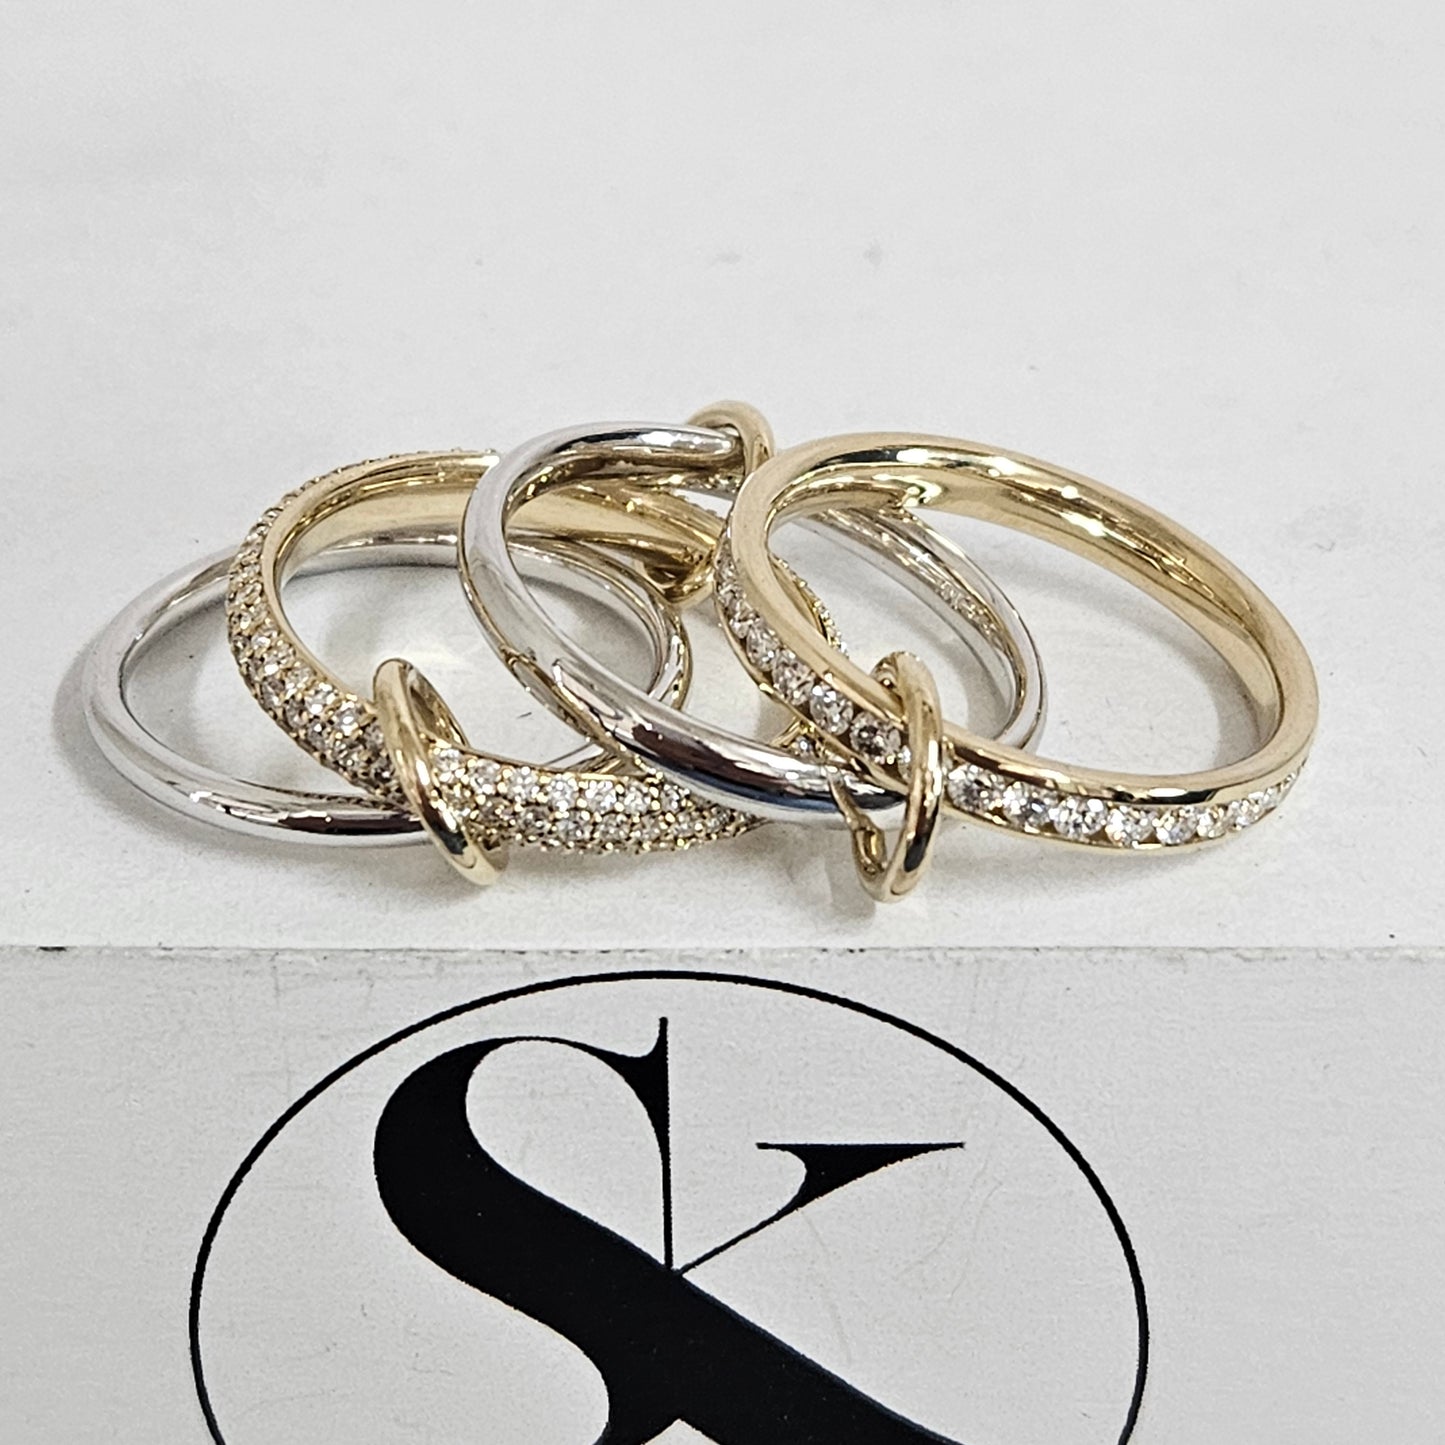 Two Eternity Natural Diamond Bands Two gold Bands with 3 connectors/Full Eternity Diamond Rings for Everyday/Sean's Bundle of 4 Rings